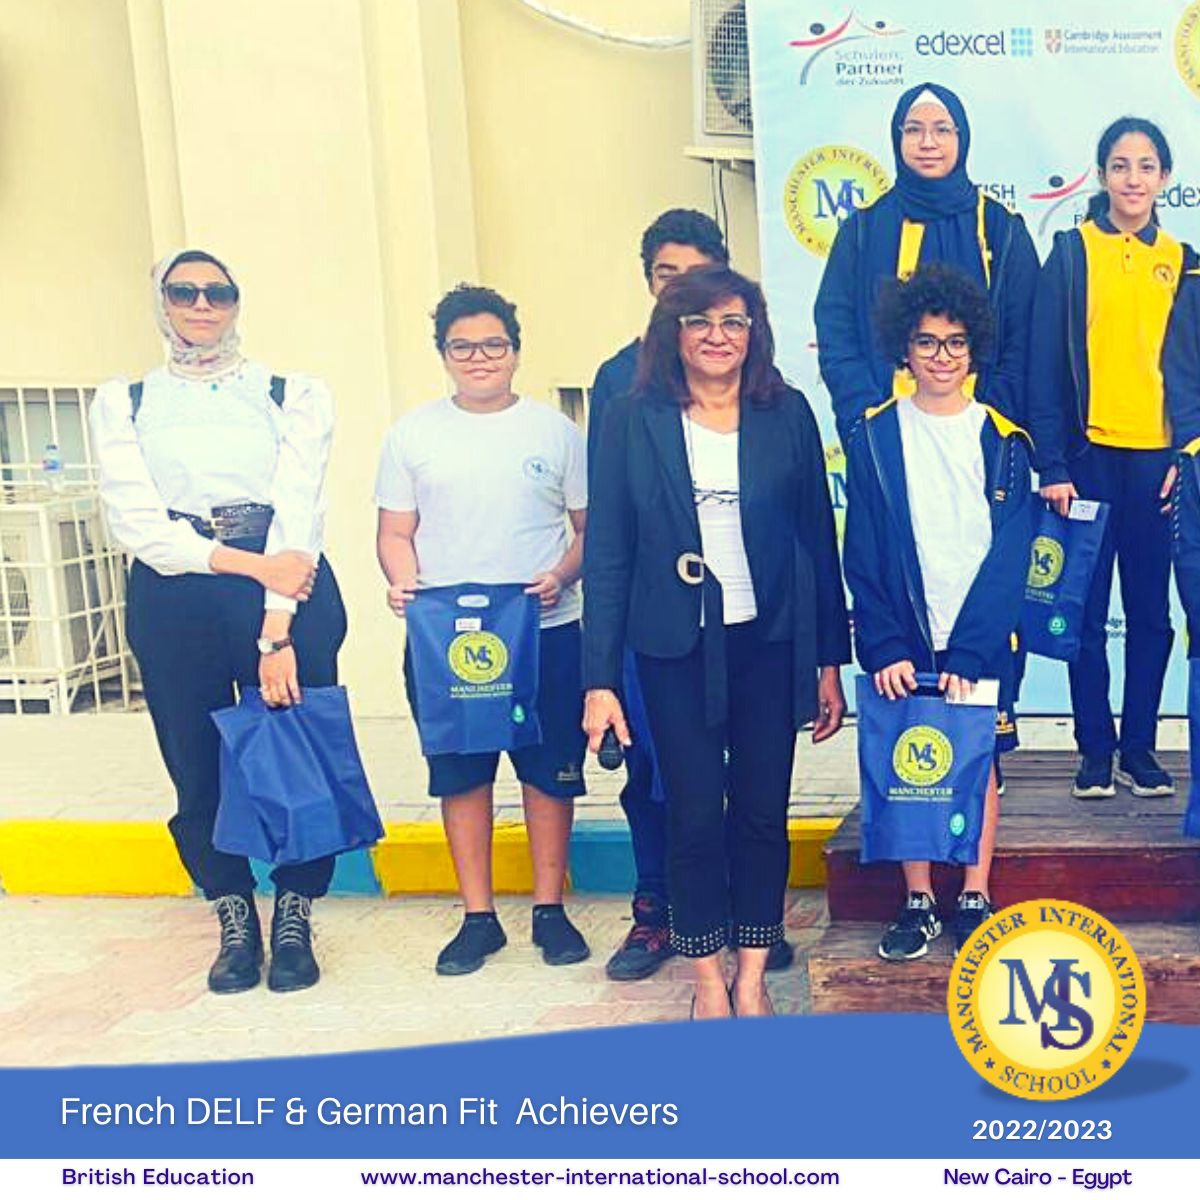 French DELF & German Fit Achievers